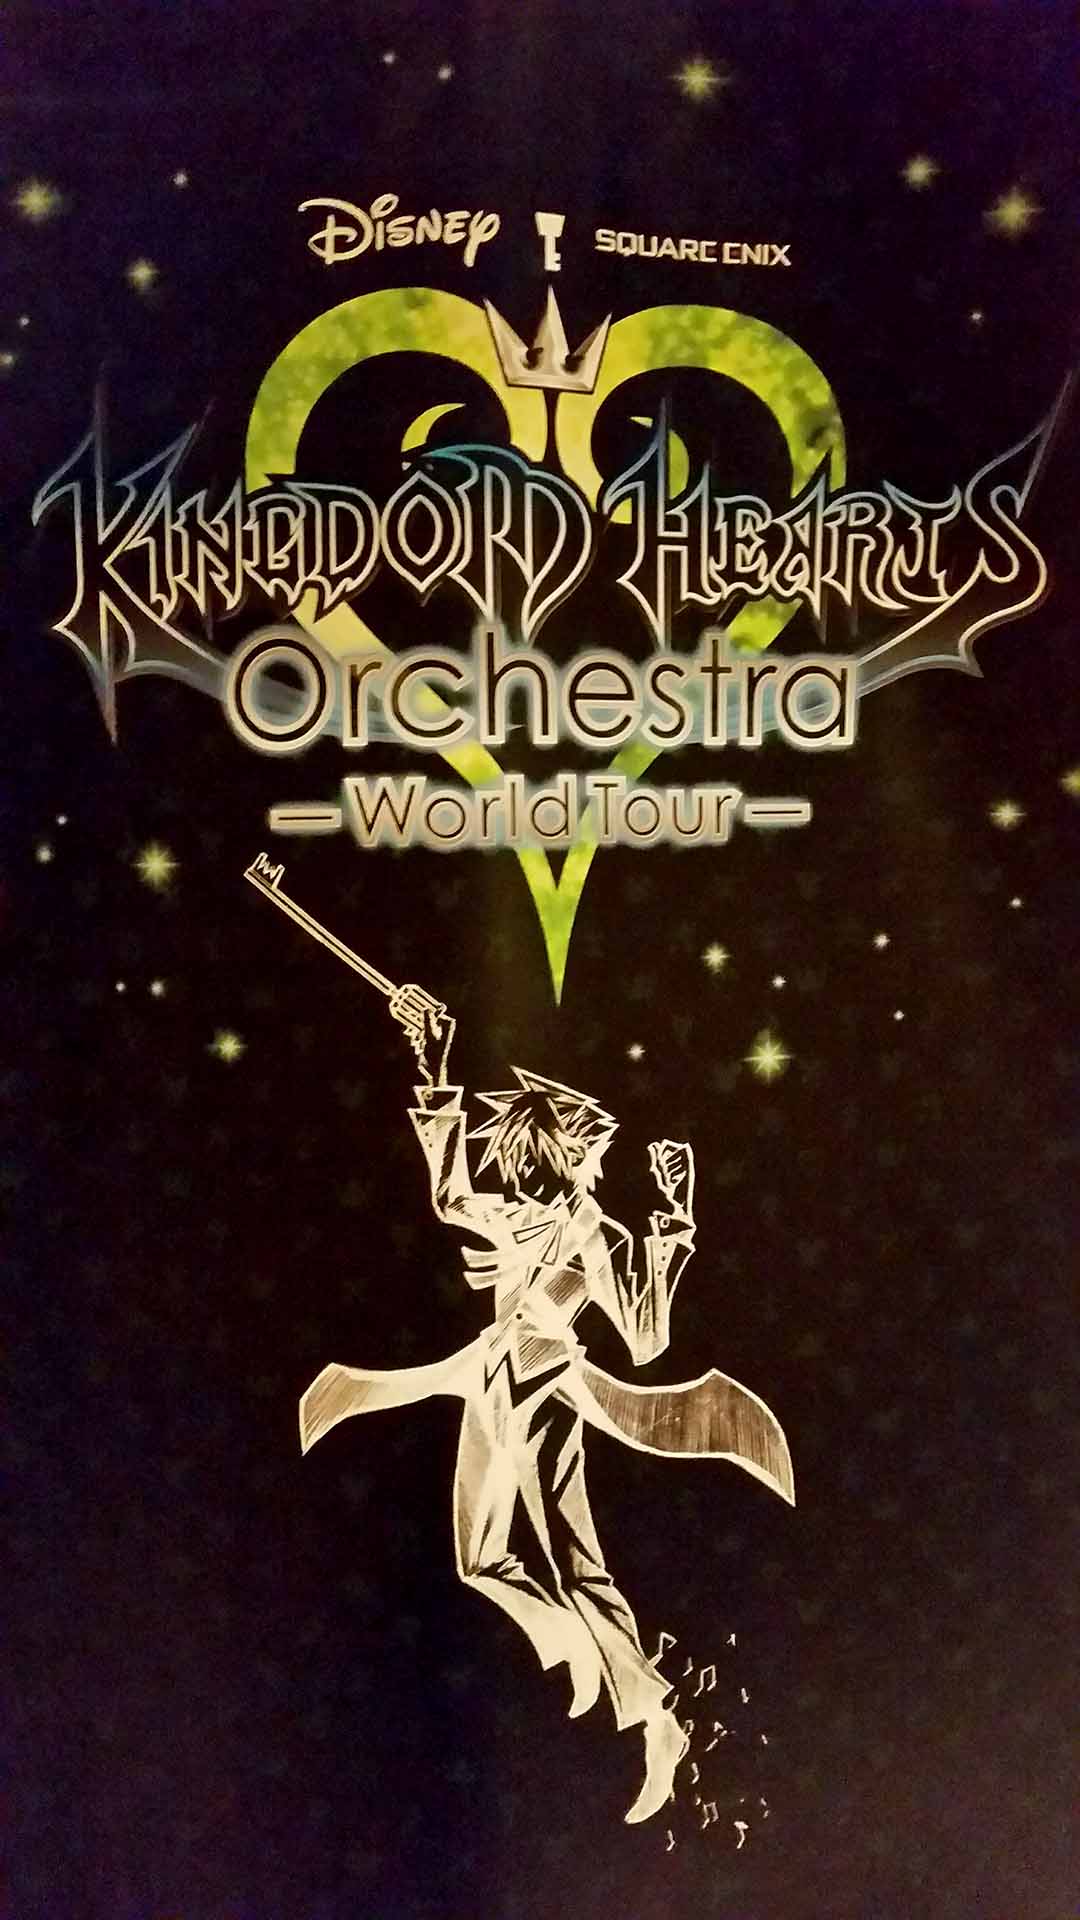 A night of magic at the Kingdom Hearts Orchestra World Tour Nintendo Wire